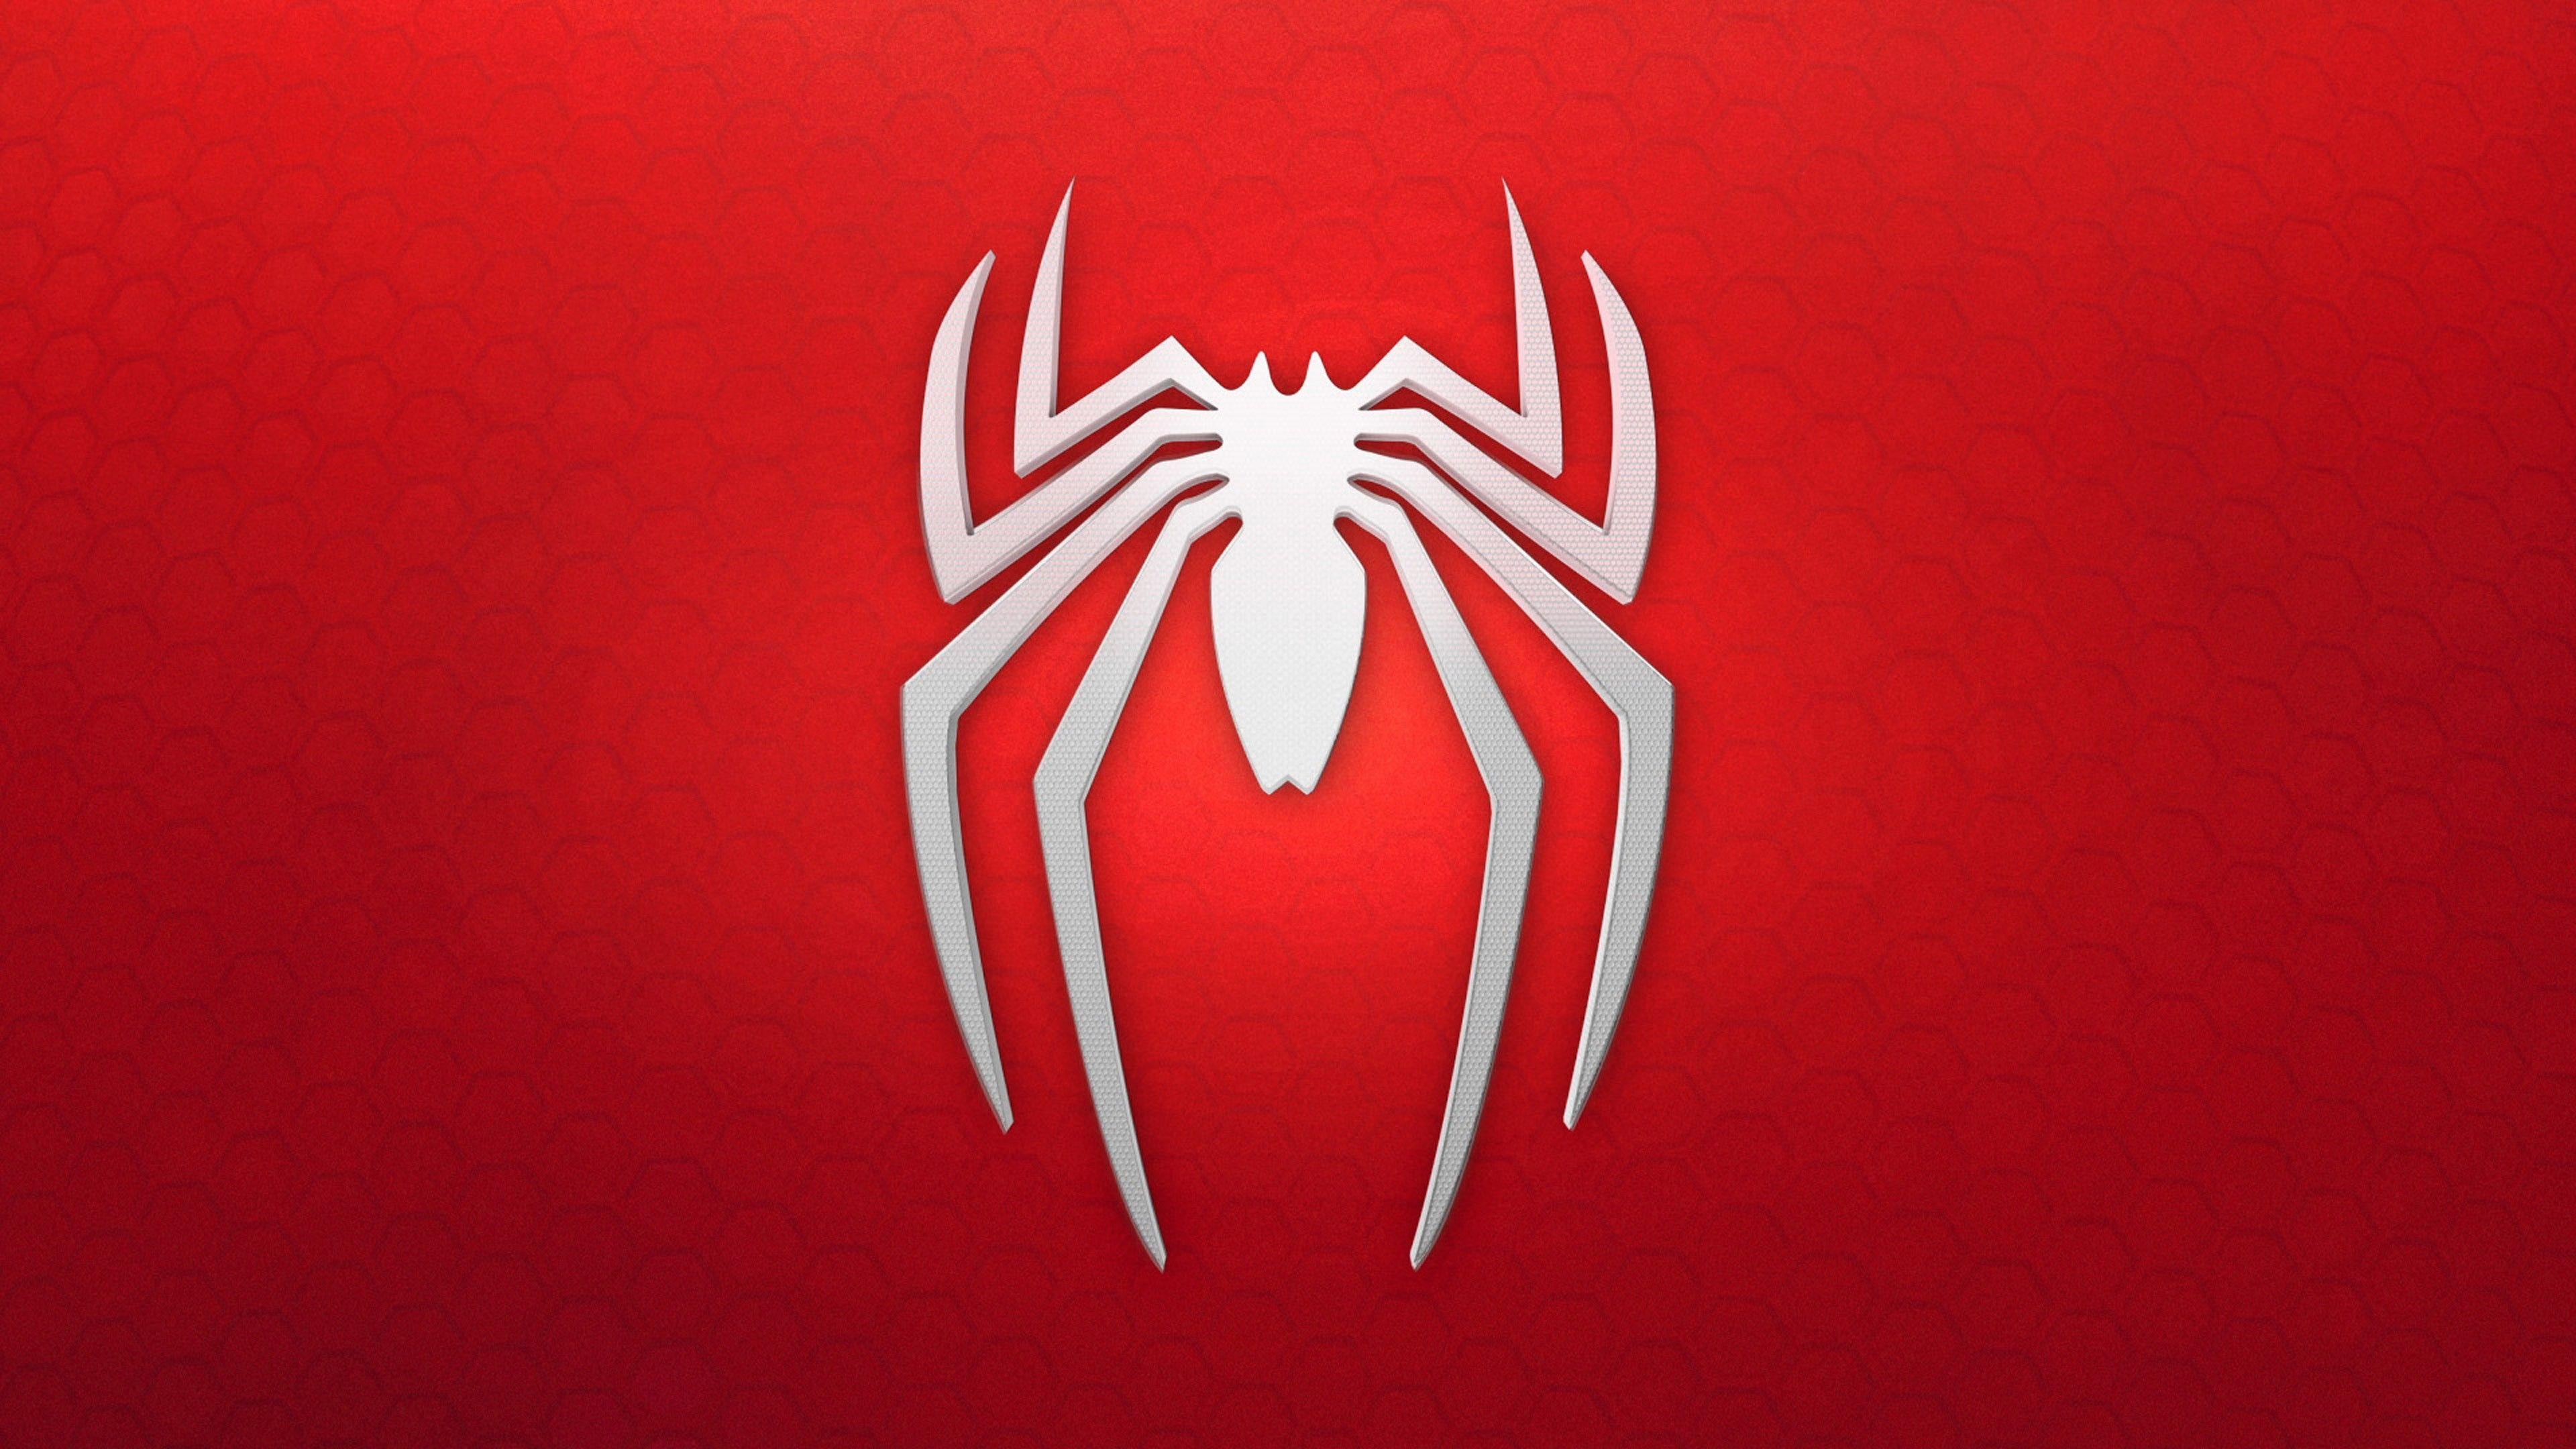 White with Red Background Logo - Wallpaper spiderman, logo, background, red, white, Games